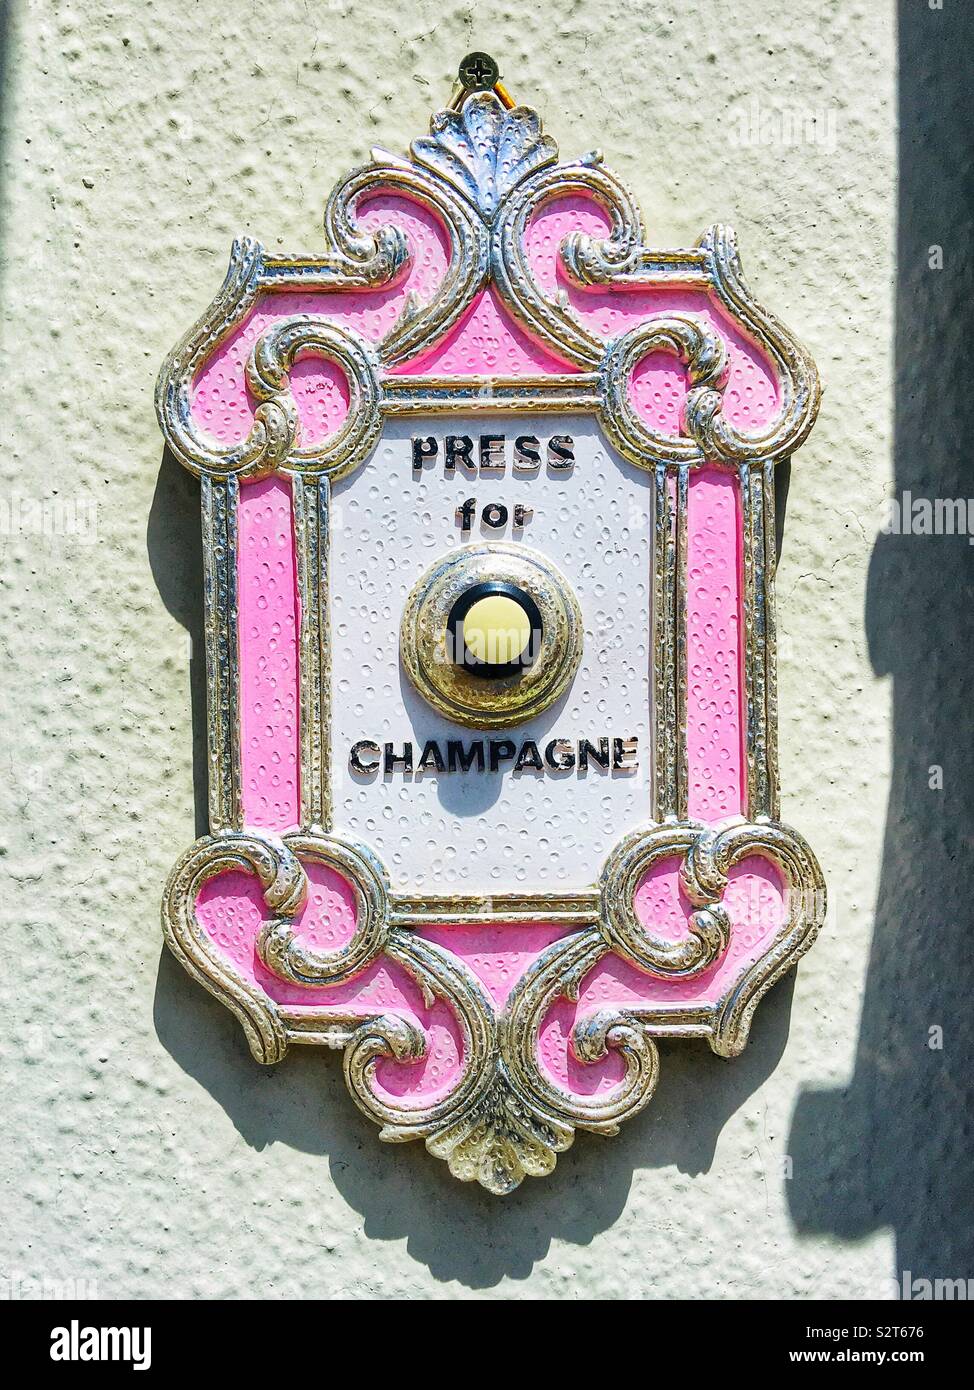 A funny doorbell in Santa Monica, California says Press For Champagne. Stock Photo